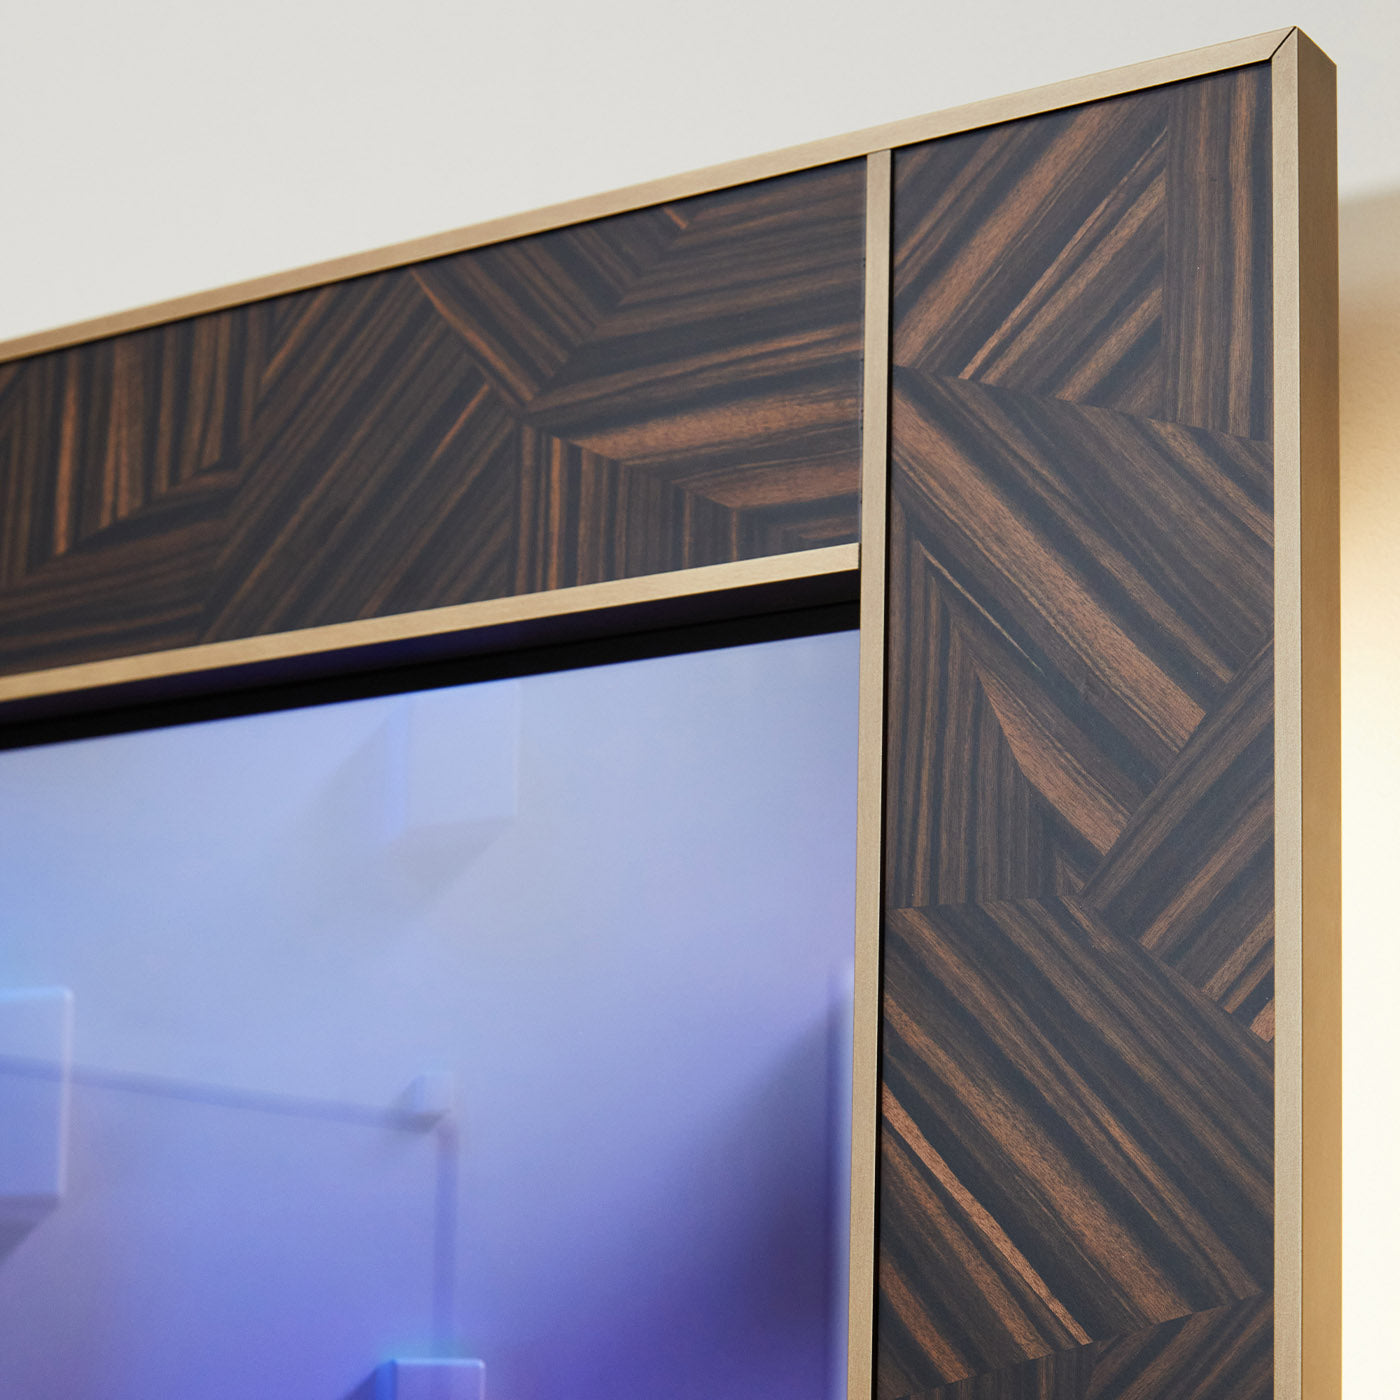 Inda Wall Mirror with Integrated 43" TV by Alfredo Colombo - Alternative view 2